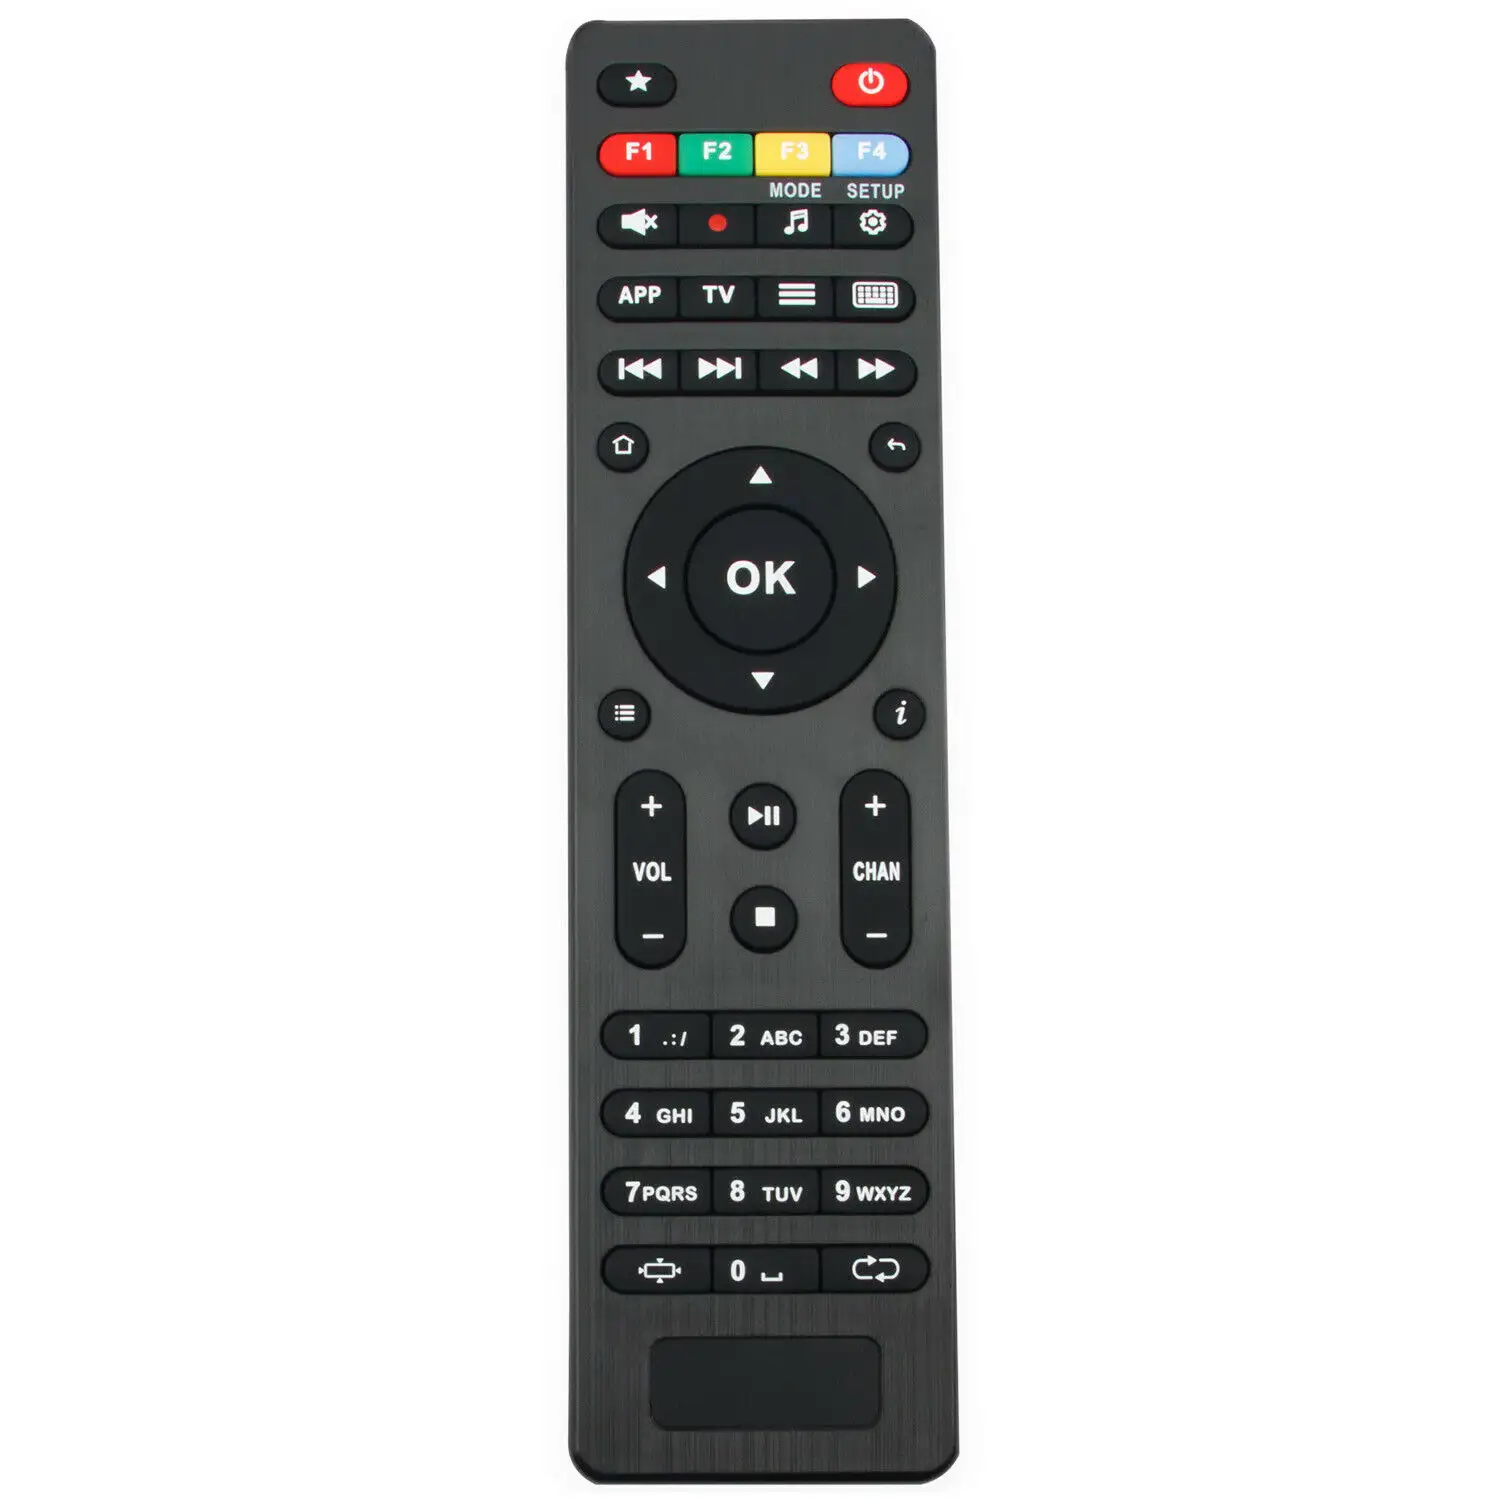 Newest TV Remote Control work for MAG 322 250 254 250 256 420 TV STB MAG322